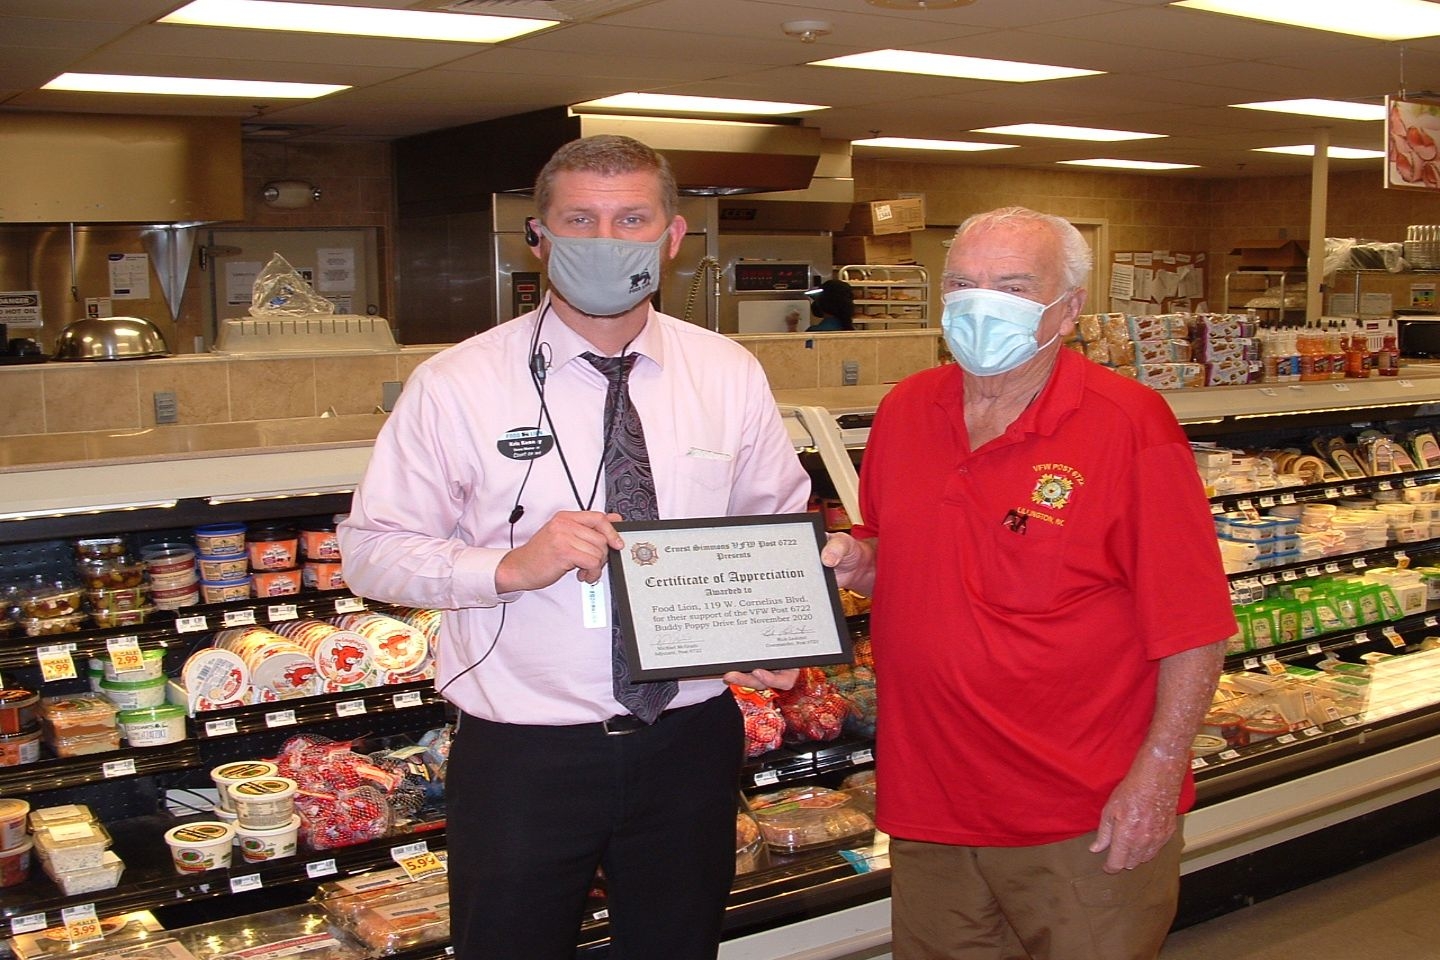 Delbert McCoy presents Certificate of Appreciation to Mr. Kris Kenny of the Food Lion Store on W. Cornelius Blvd, Lillington for their support of the November 2020 Buddy Poppy Drive.